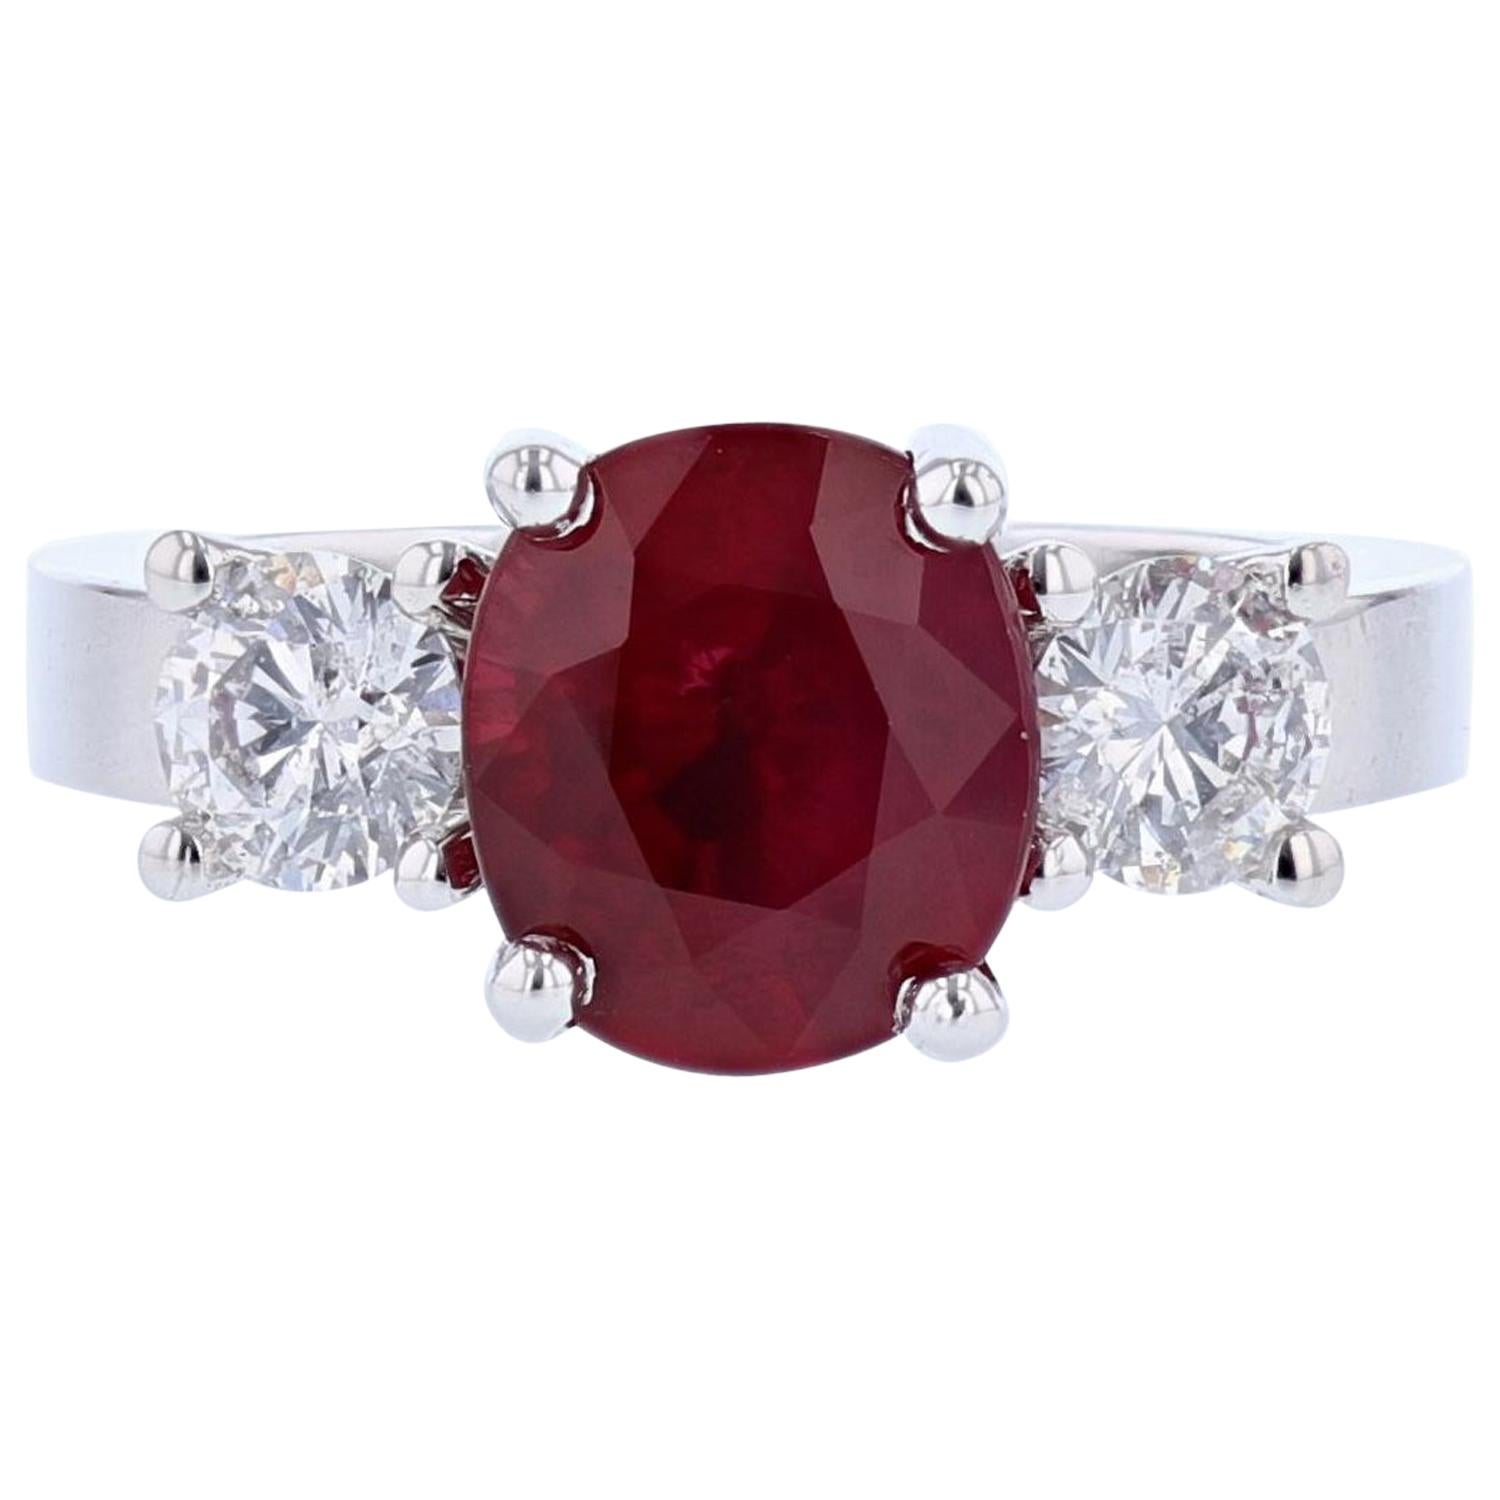 14 Karat Gold 2.73 Carat Certified Oval Cut Ruby and Diamond Ring